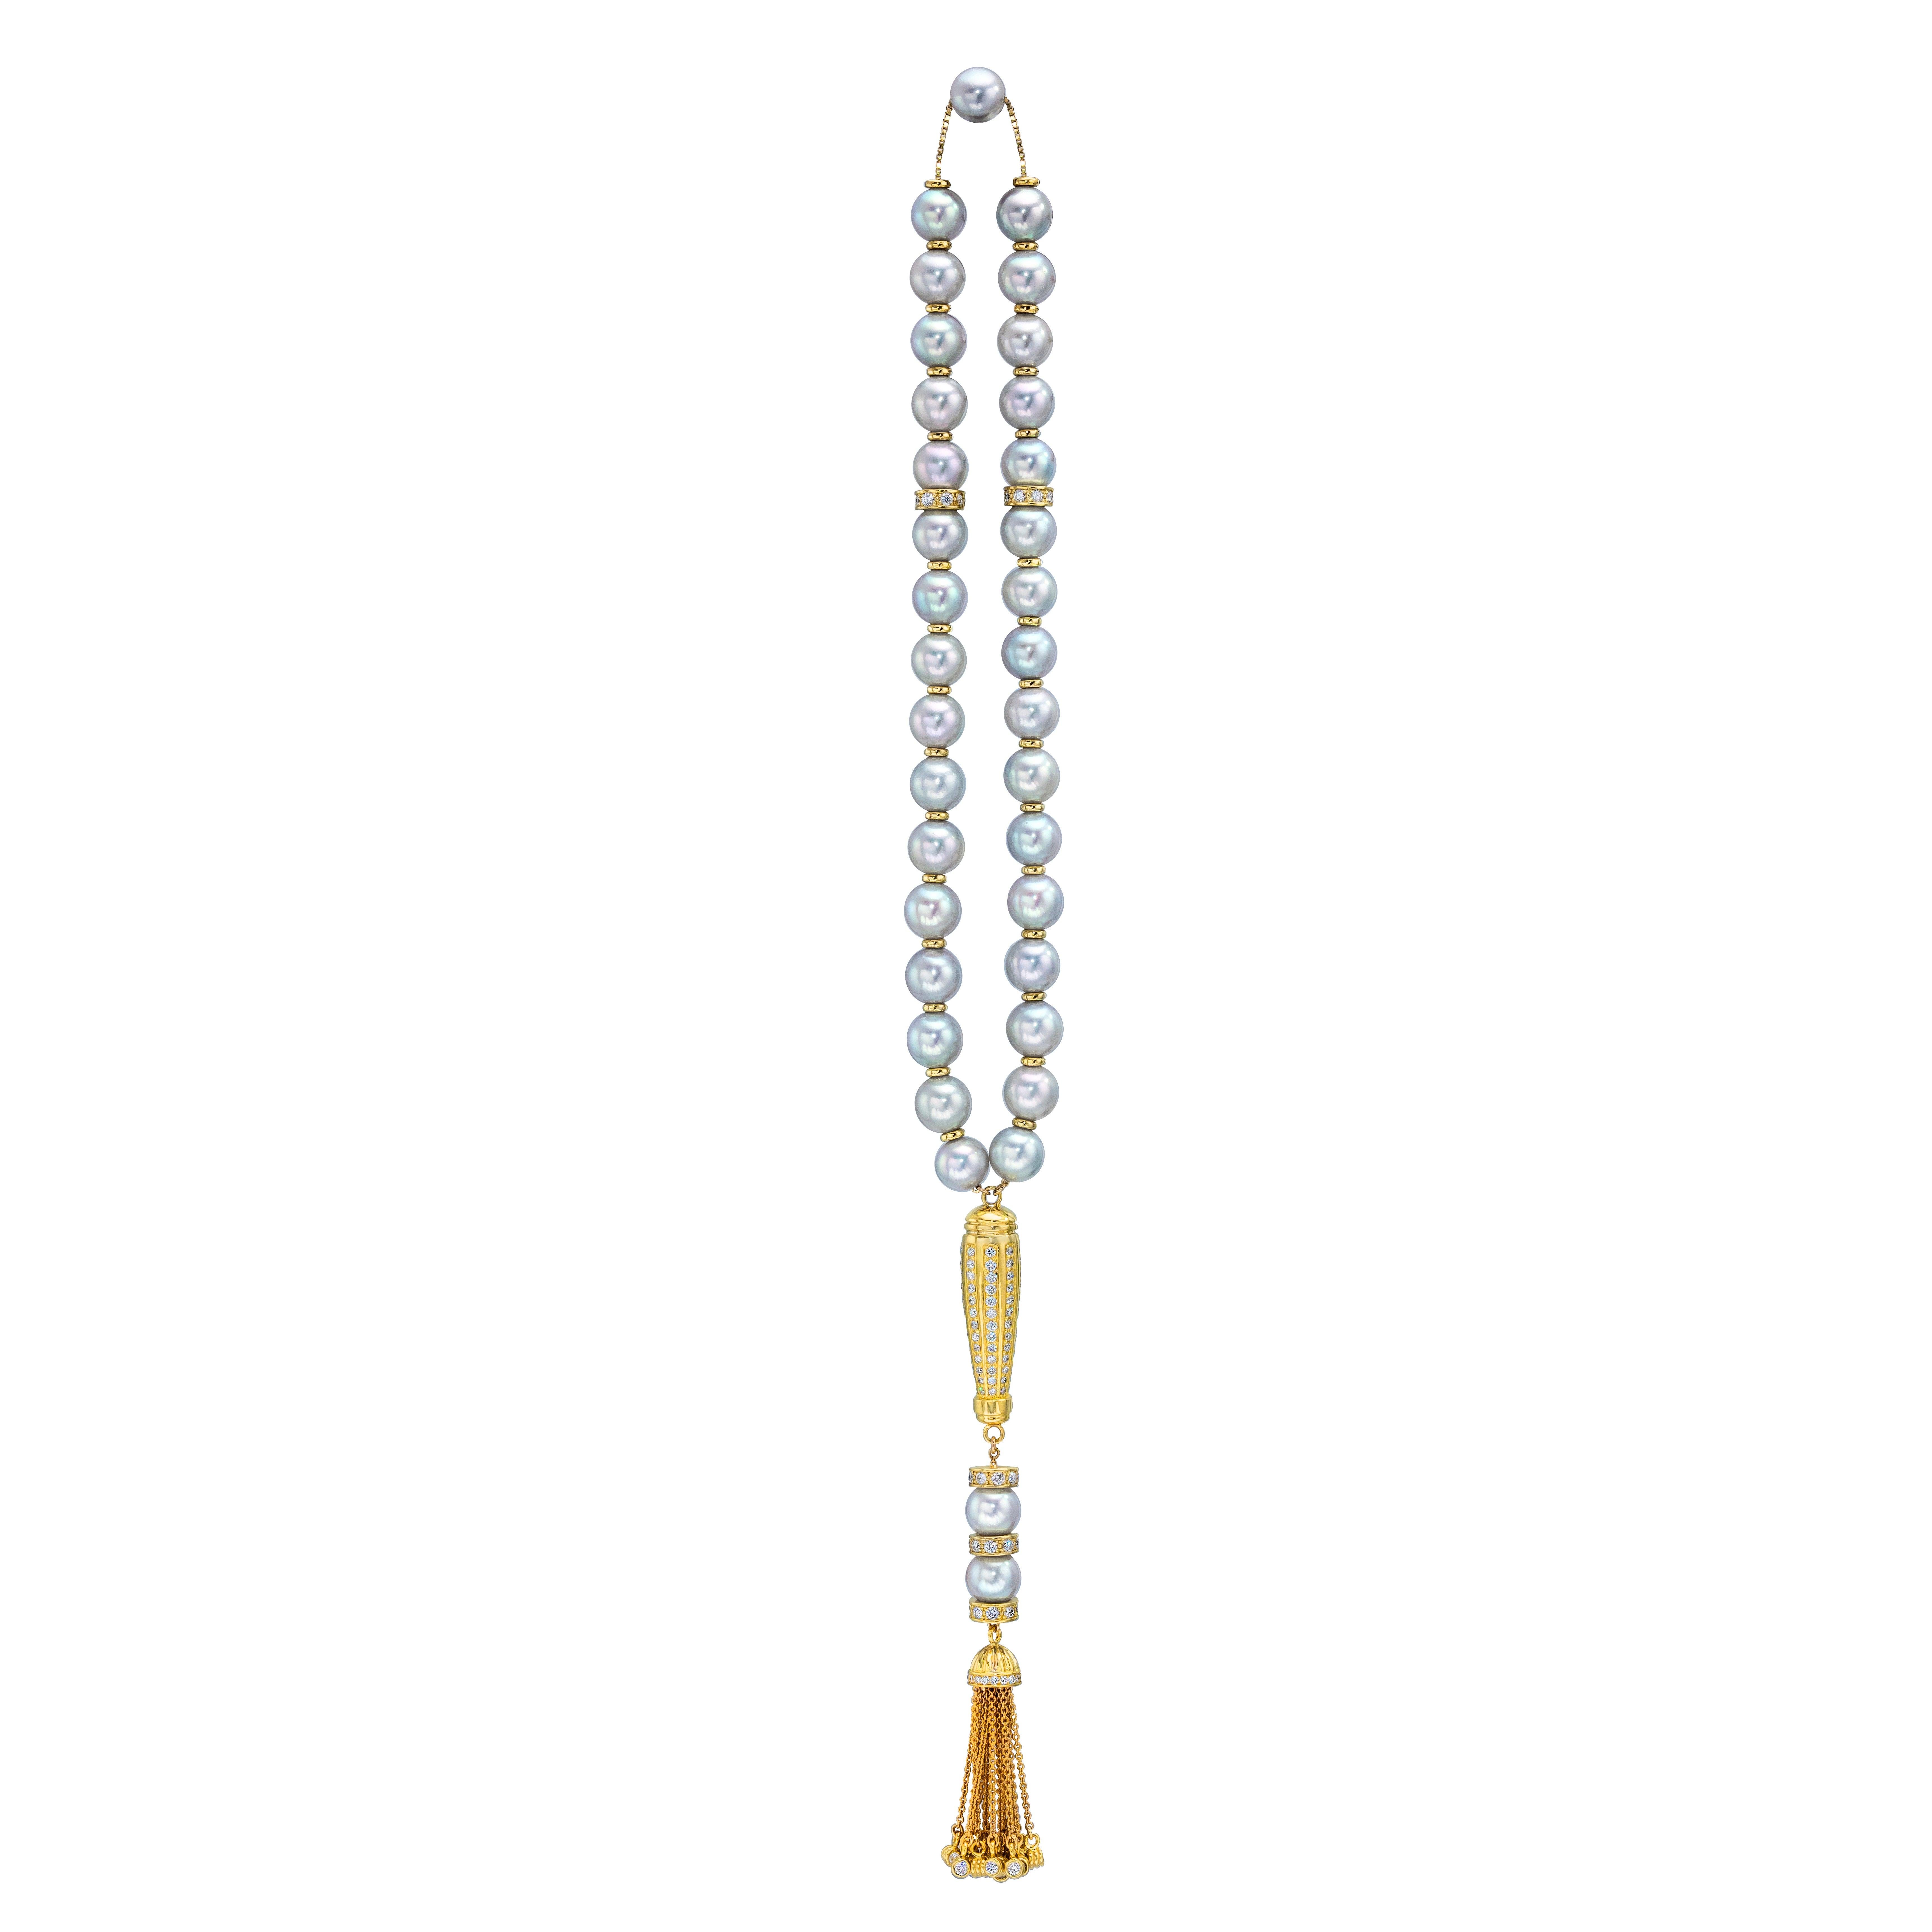 Beautiful Prayer Beads for the traditional and stylish man.
Consists of 33 Akoya Light Gray Pearls. Very hard to find Color.
Set in 18 Karat Yellow Gold with 201 Round Brilliant Diamonds weighing 2.51 Carats.
Made the Traditional way with Tassels.